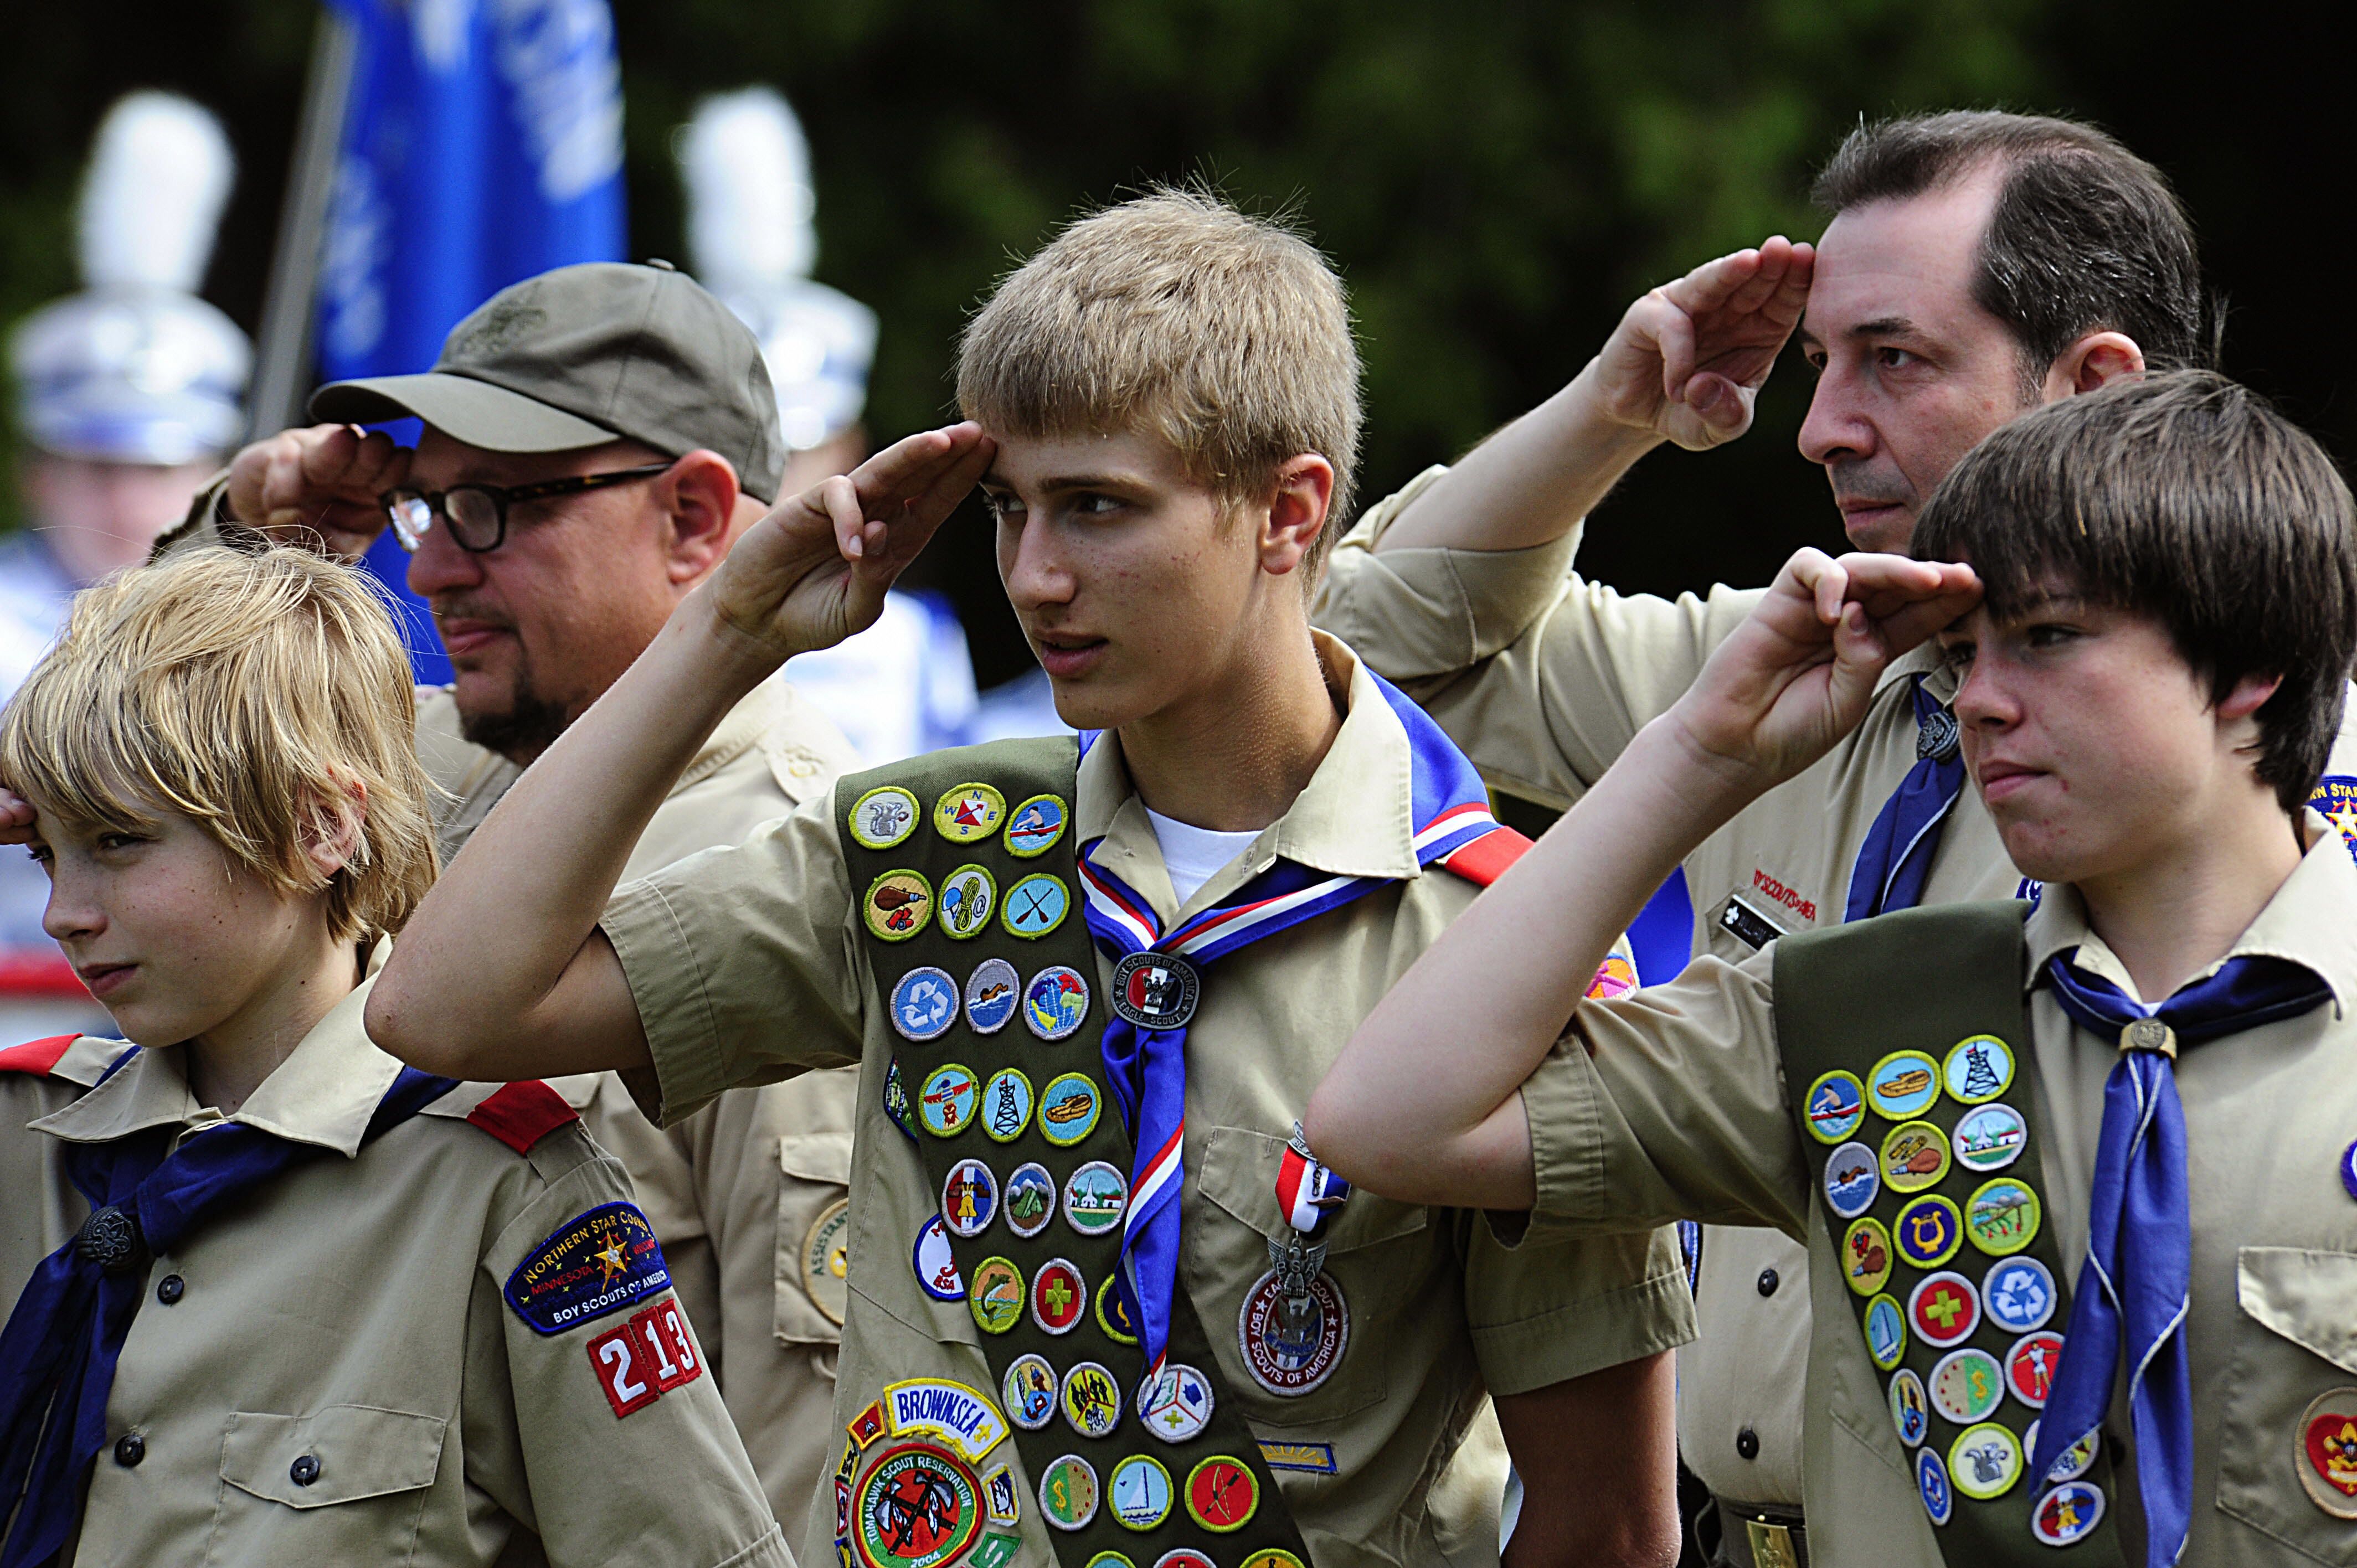 Mormon church to end 105-year relationship with the Boy Scouts